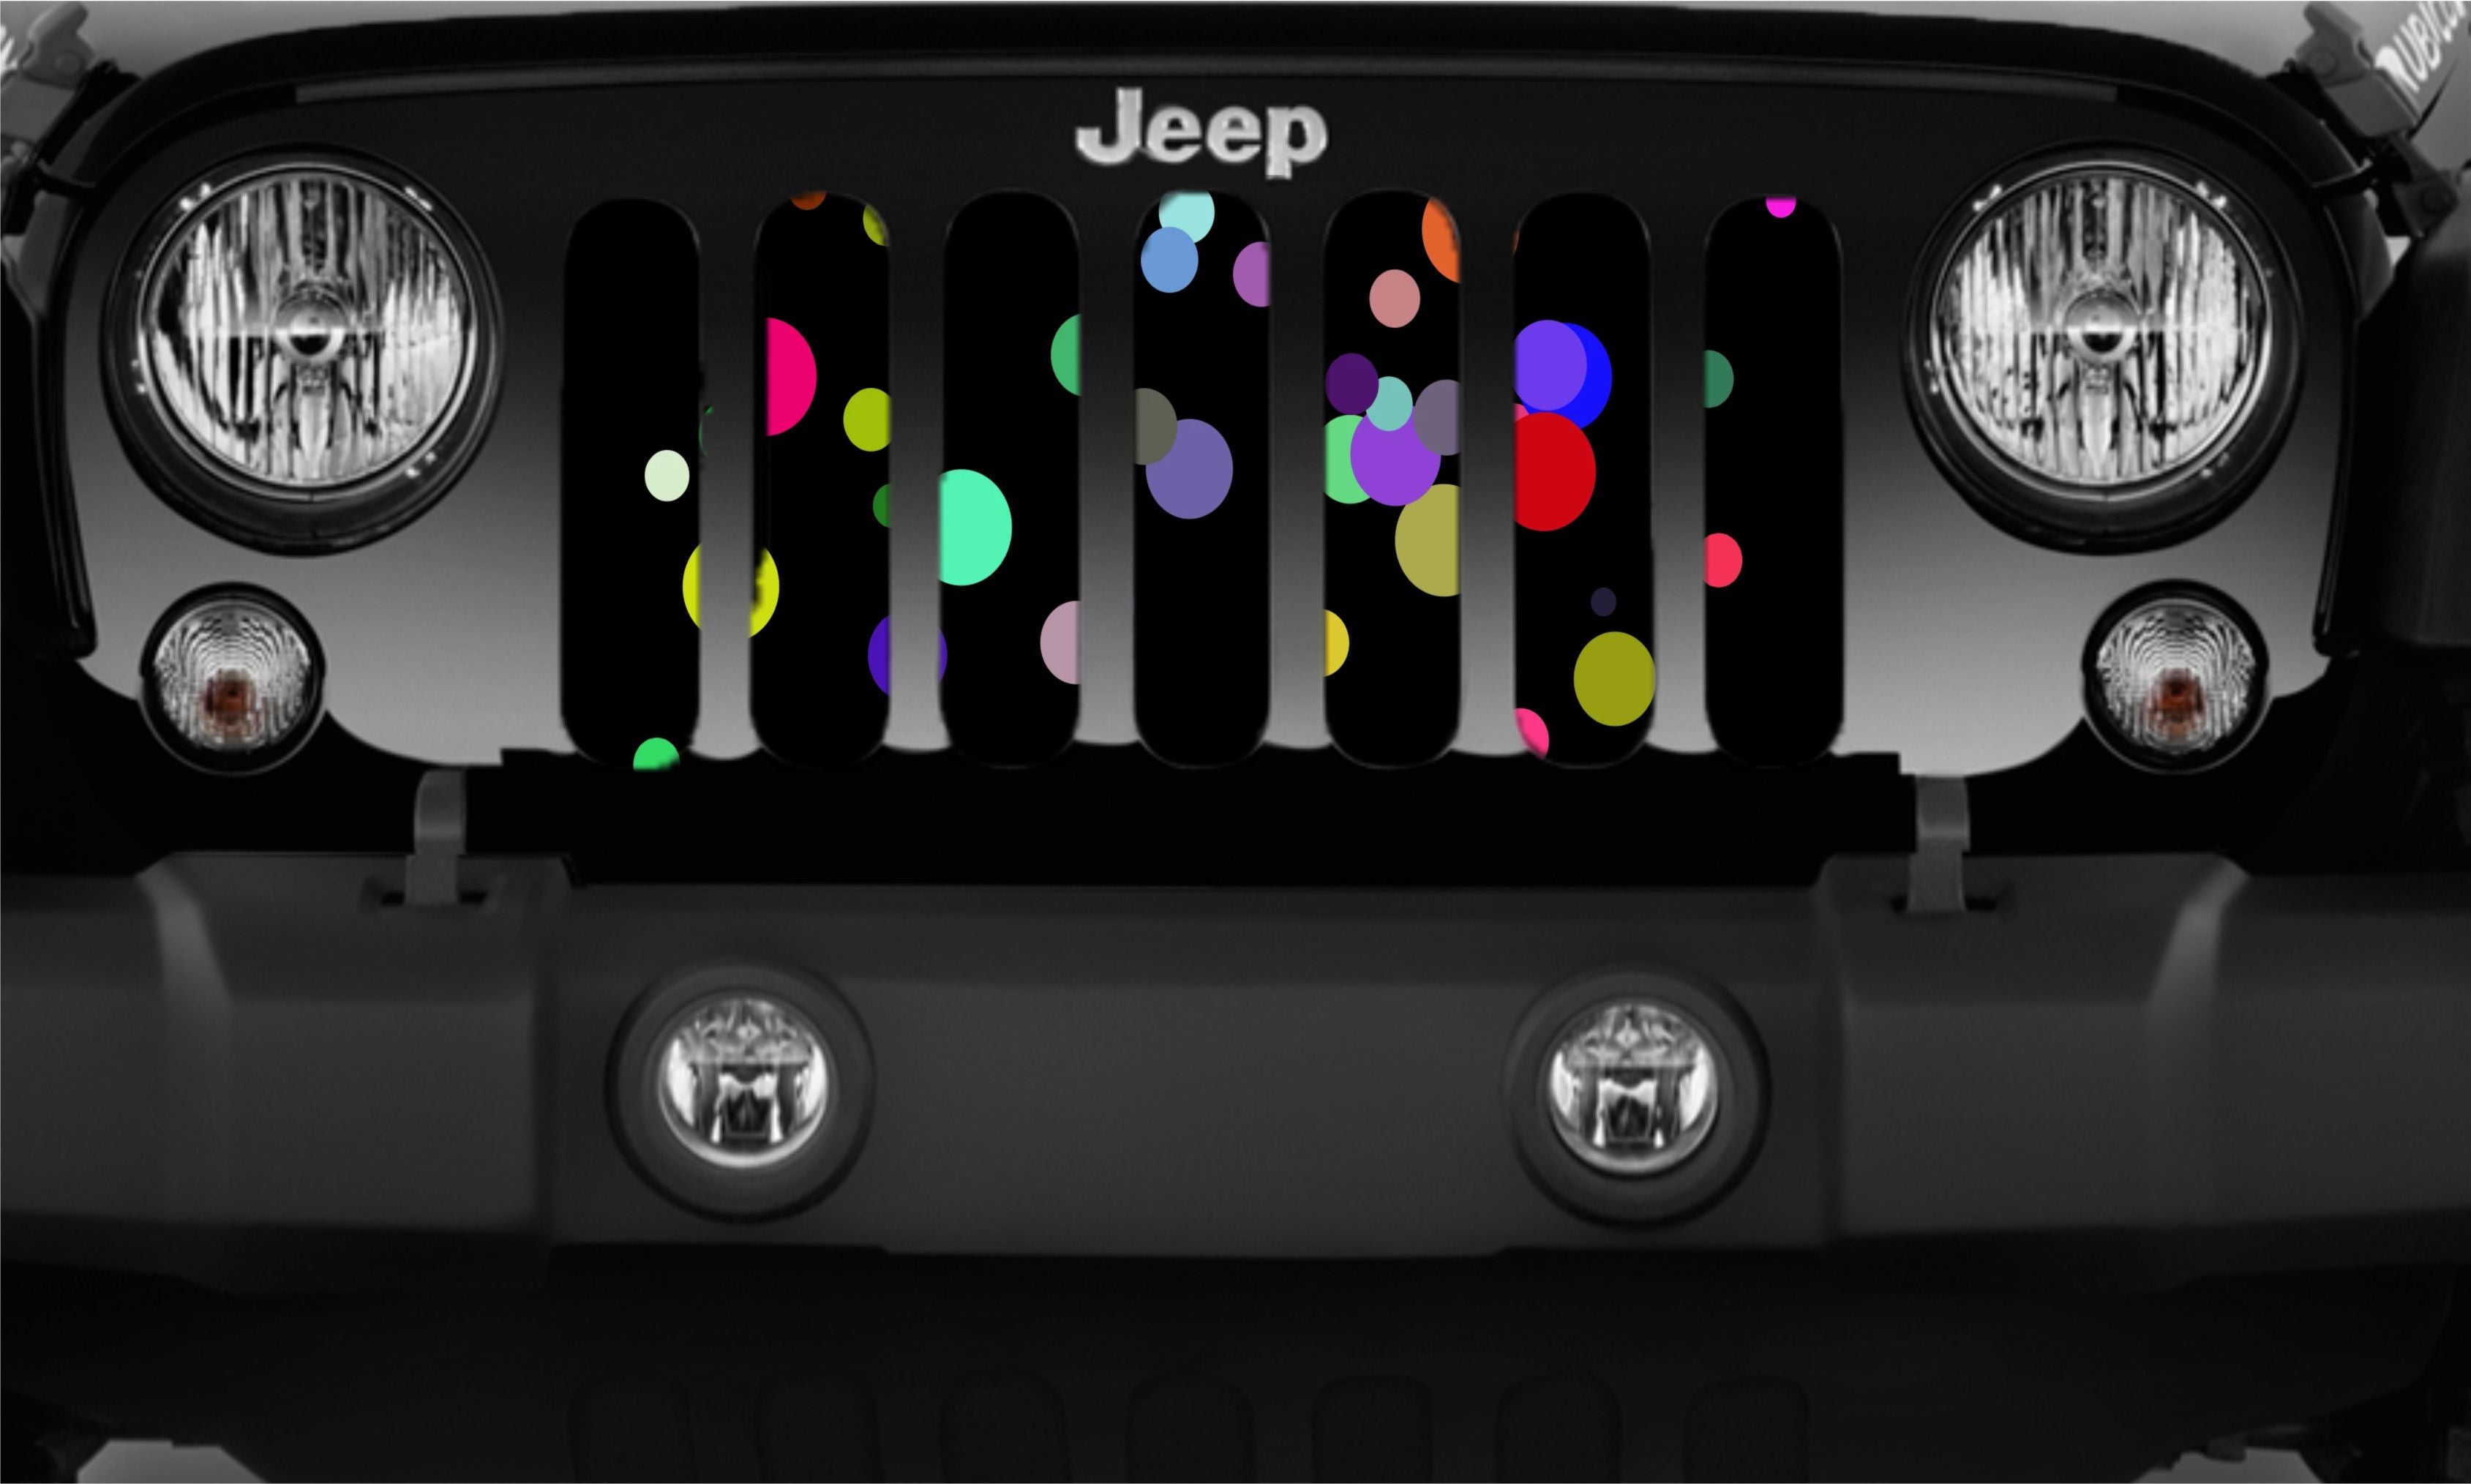 Multicolored Polka Dot Design Grille Insert for Jeep